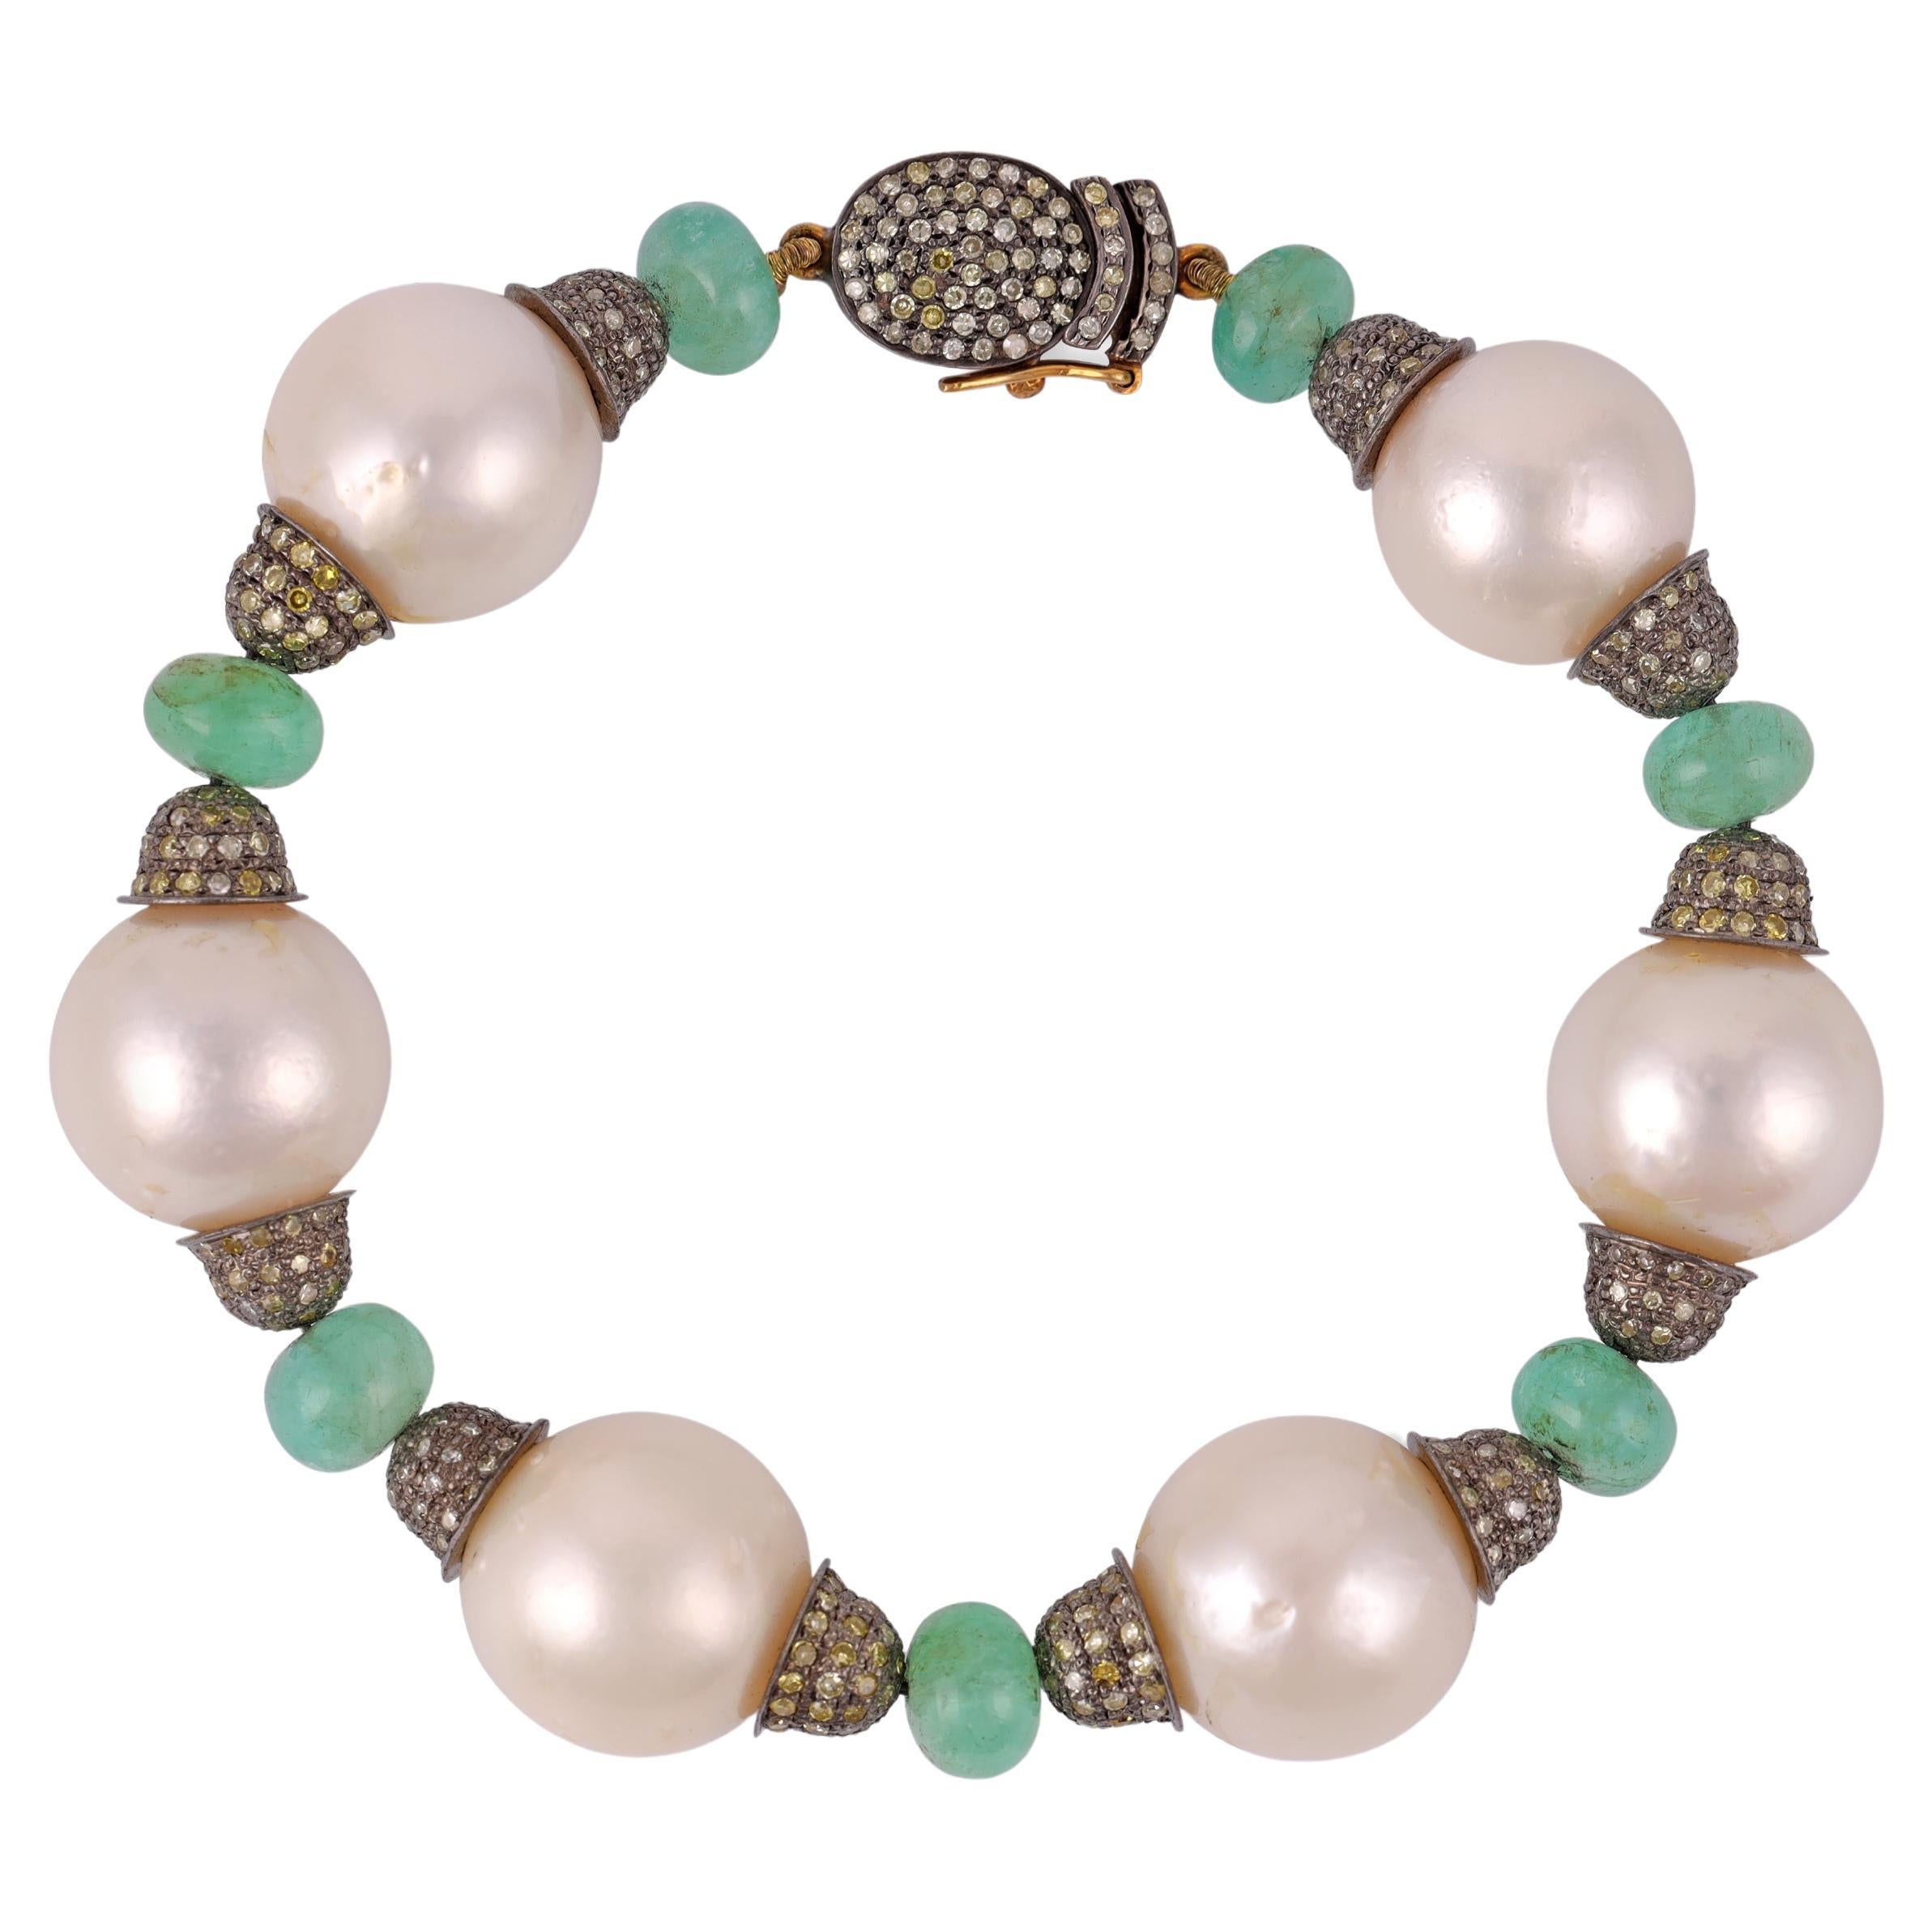 OLD Antique Pearl Diamond Emerald and Silver Upon Gold Bracelet